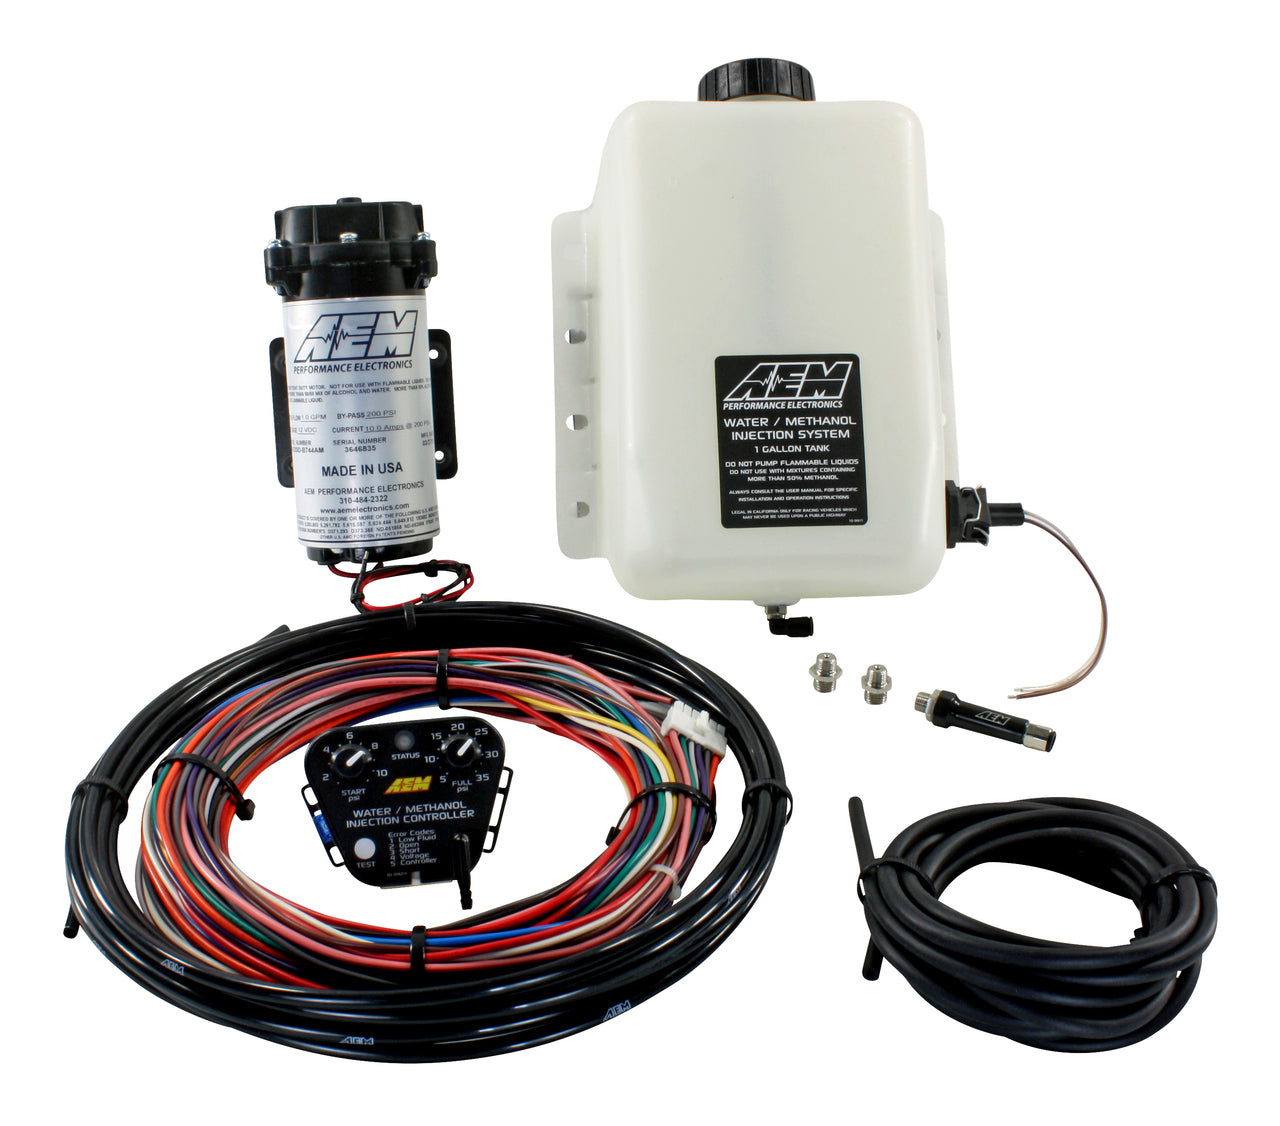 AEM Universal Water/Methanol Injection System V3 with 1 Gallon Tank | ML Performance UK